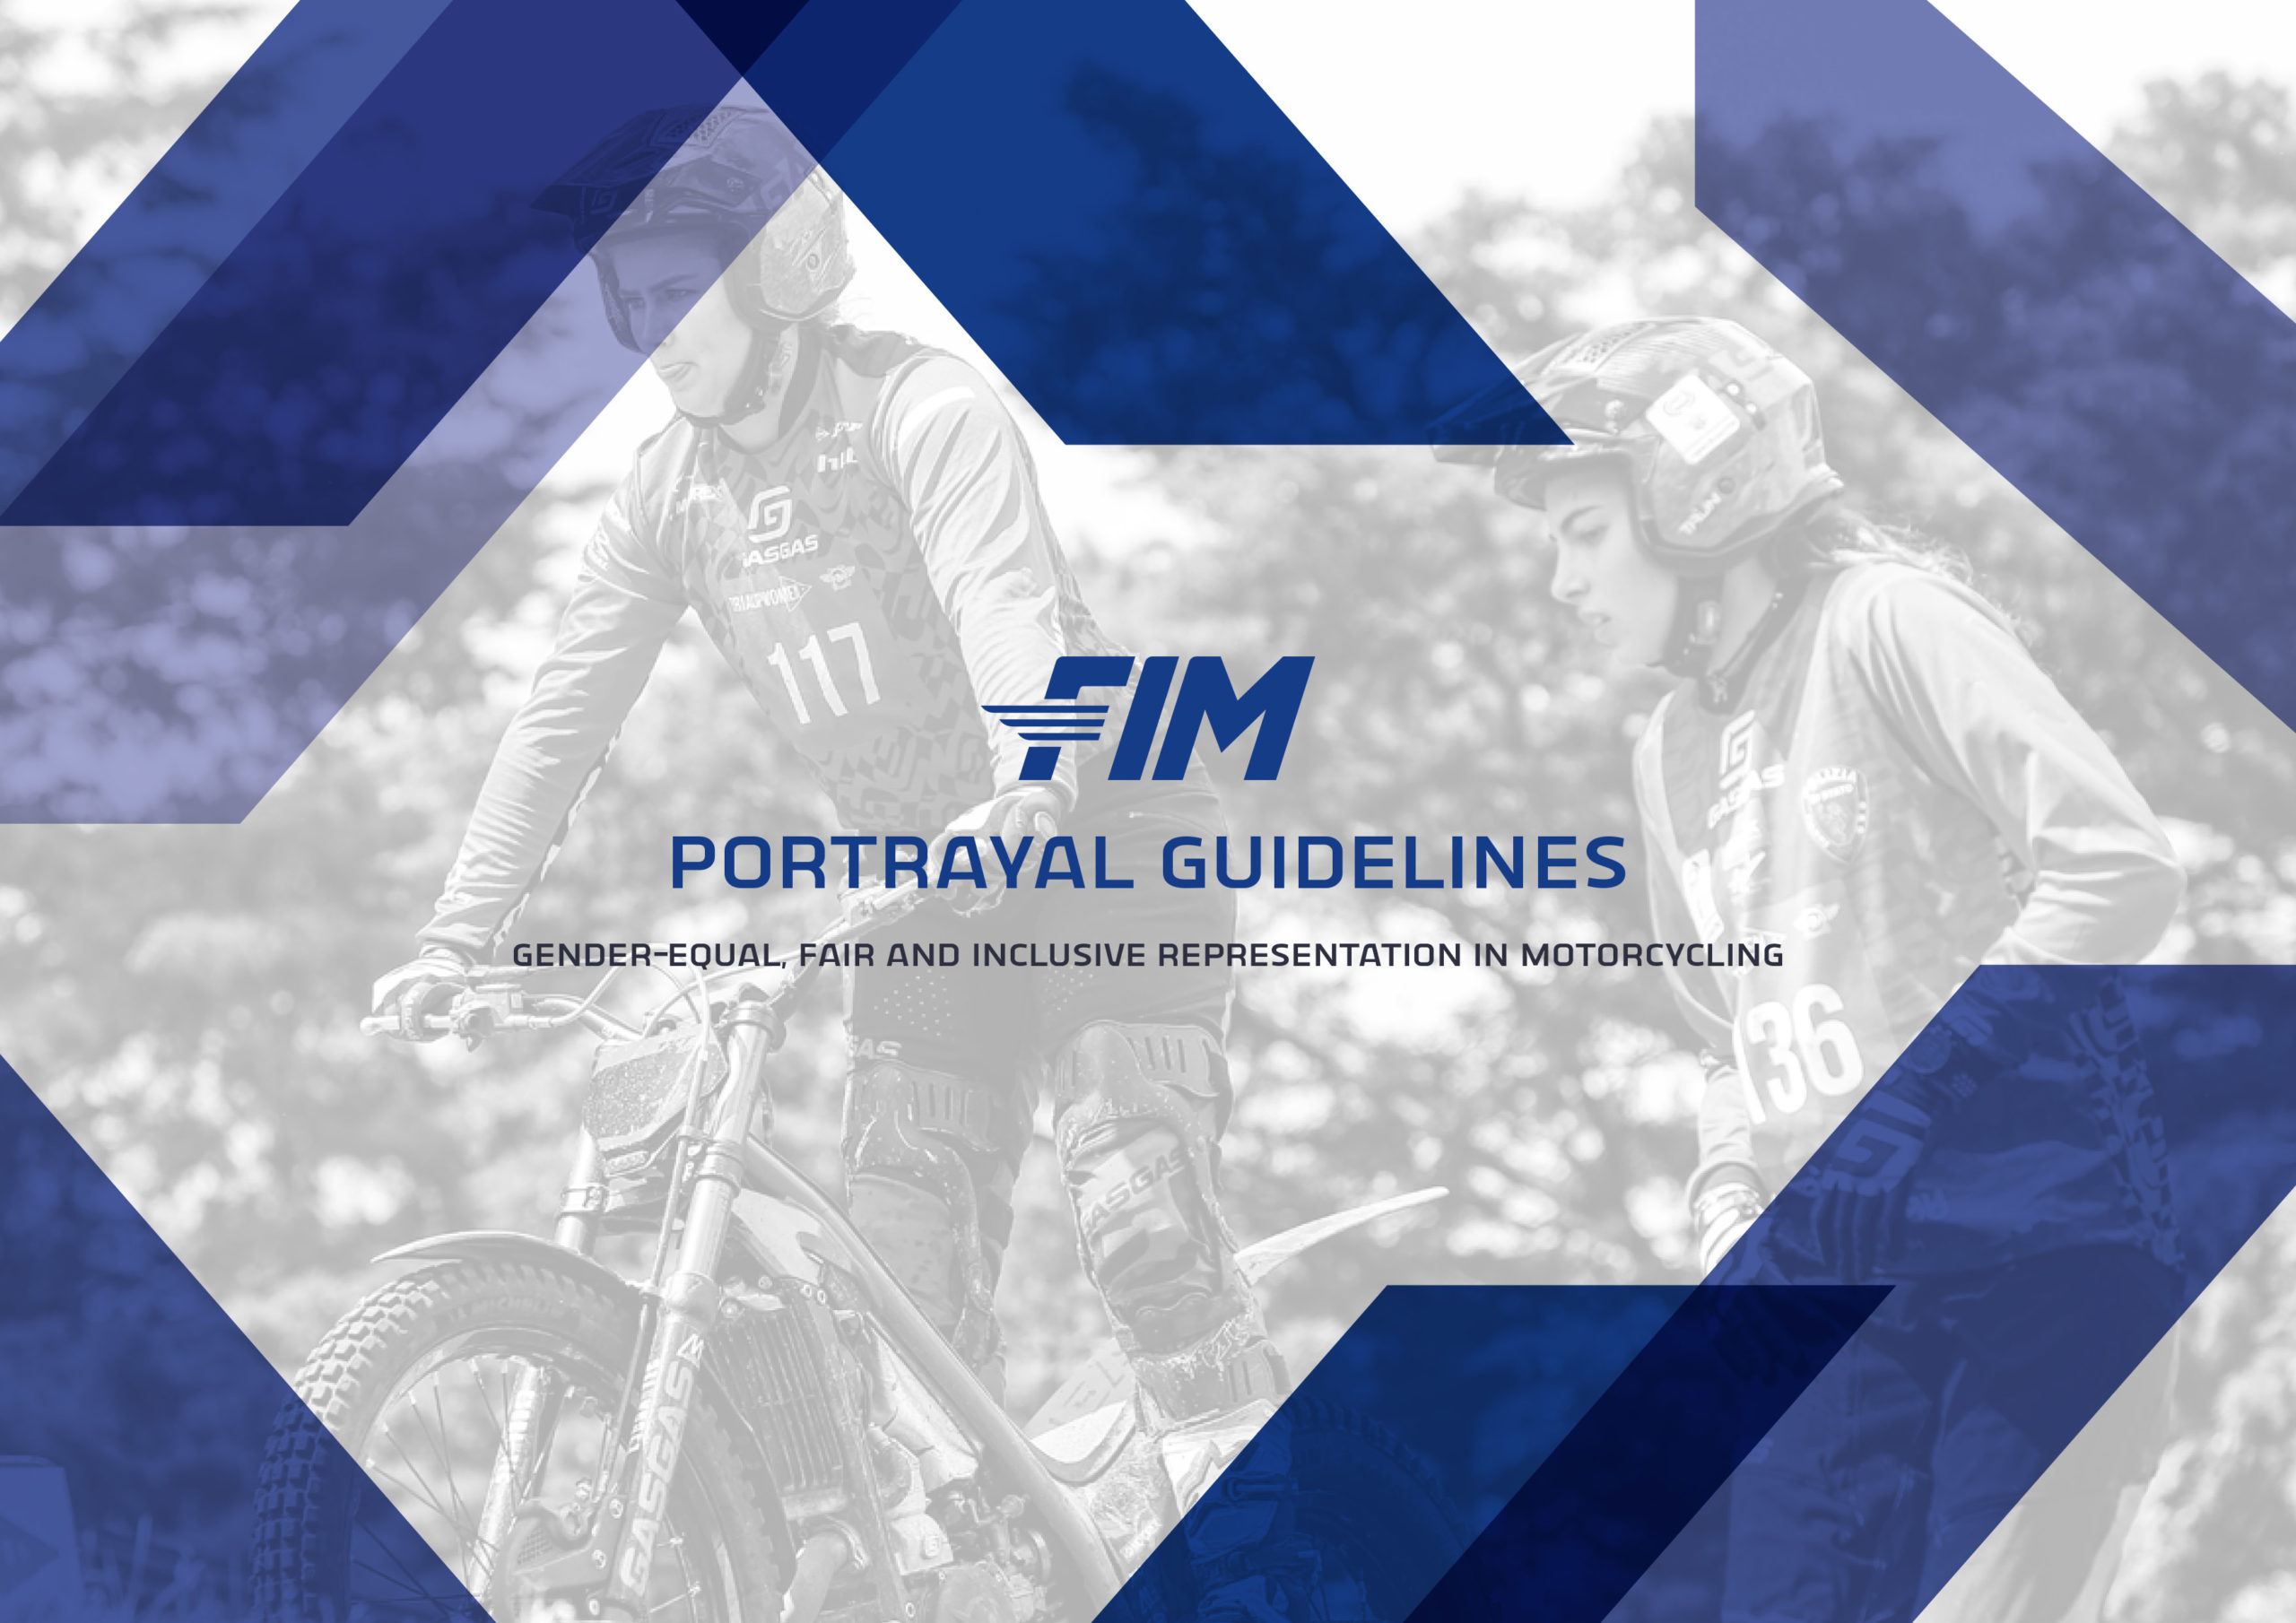 Portrayal Guidelines